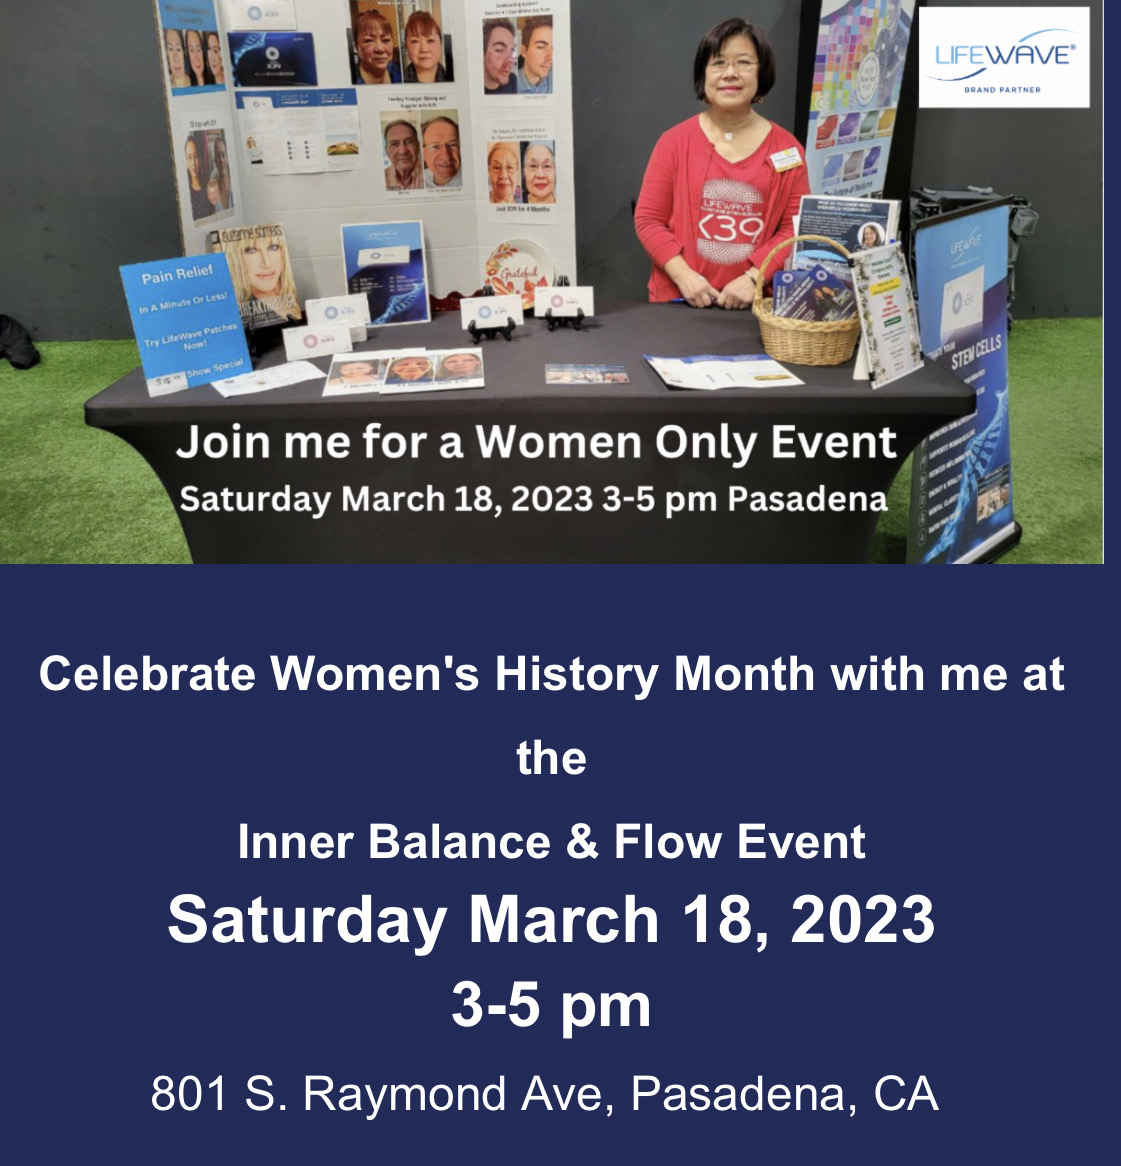 Attention all women! Join me for a Women Only Event on Saturday, March 18, 2023, from 3-5 pm in Pasadena to celebrate Women's History Month.  Space is limited, so be sure to save your spot and invite a friend to do the same. The dress code is workout clothes, and don't forget to bring your water bottle, yoga mat, or towel.